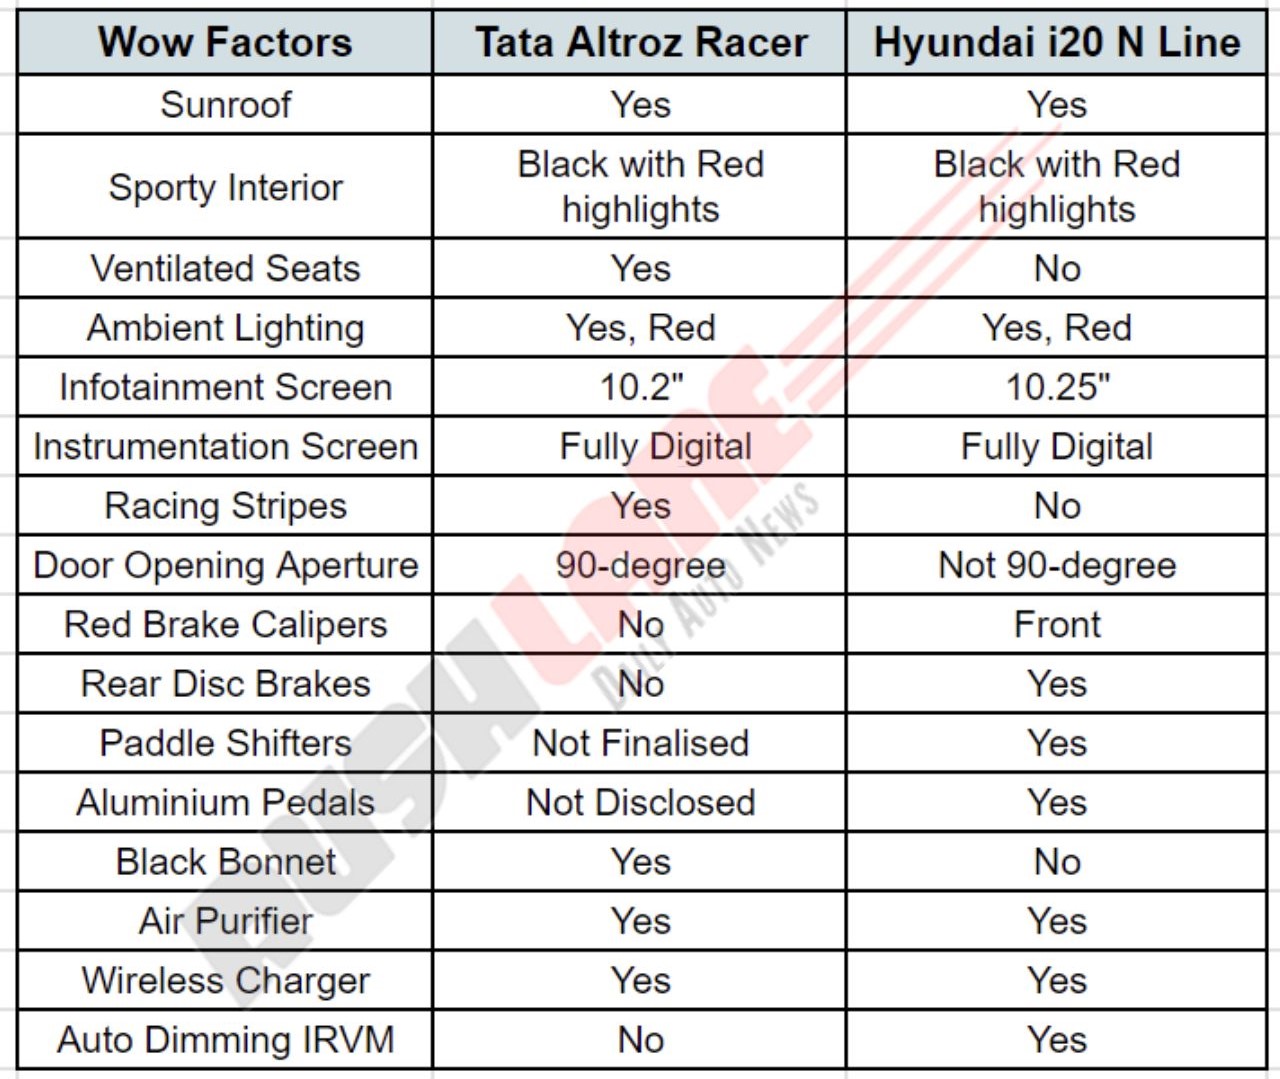 Altroz Racer Vs i20 N Line - Features